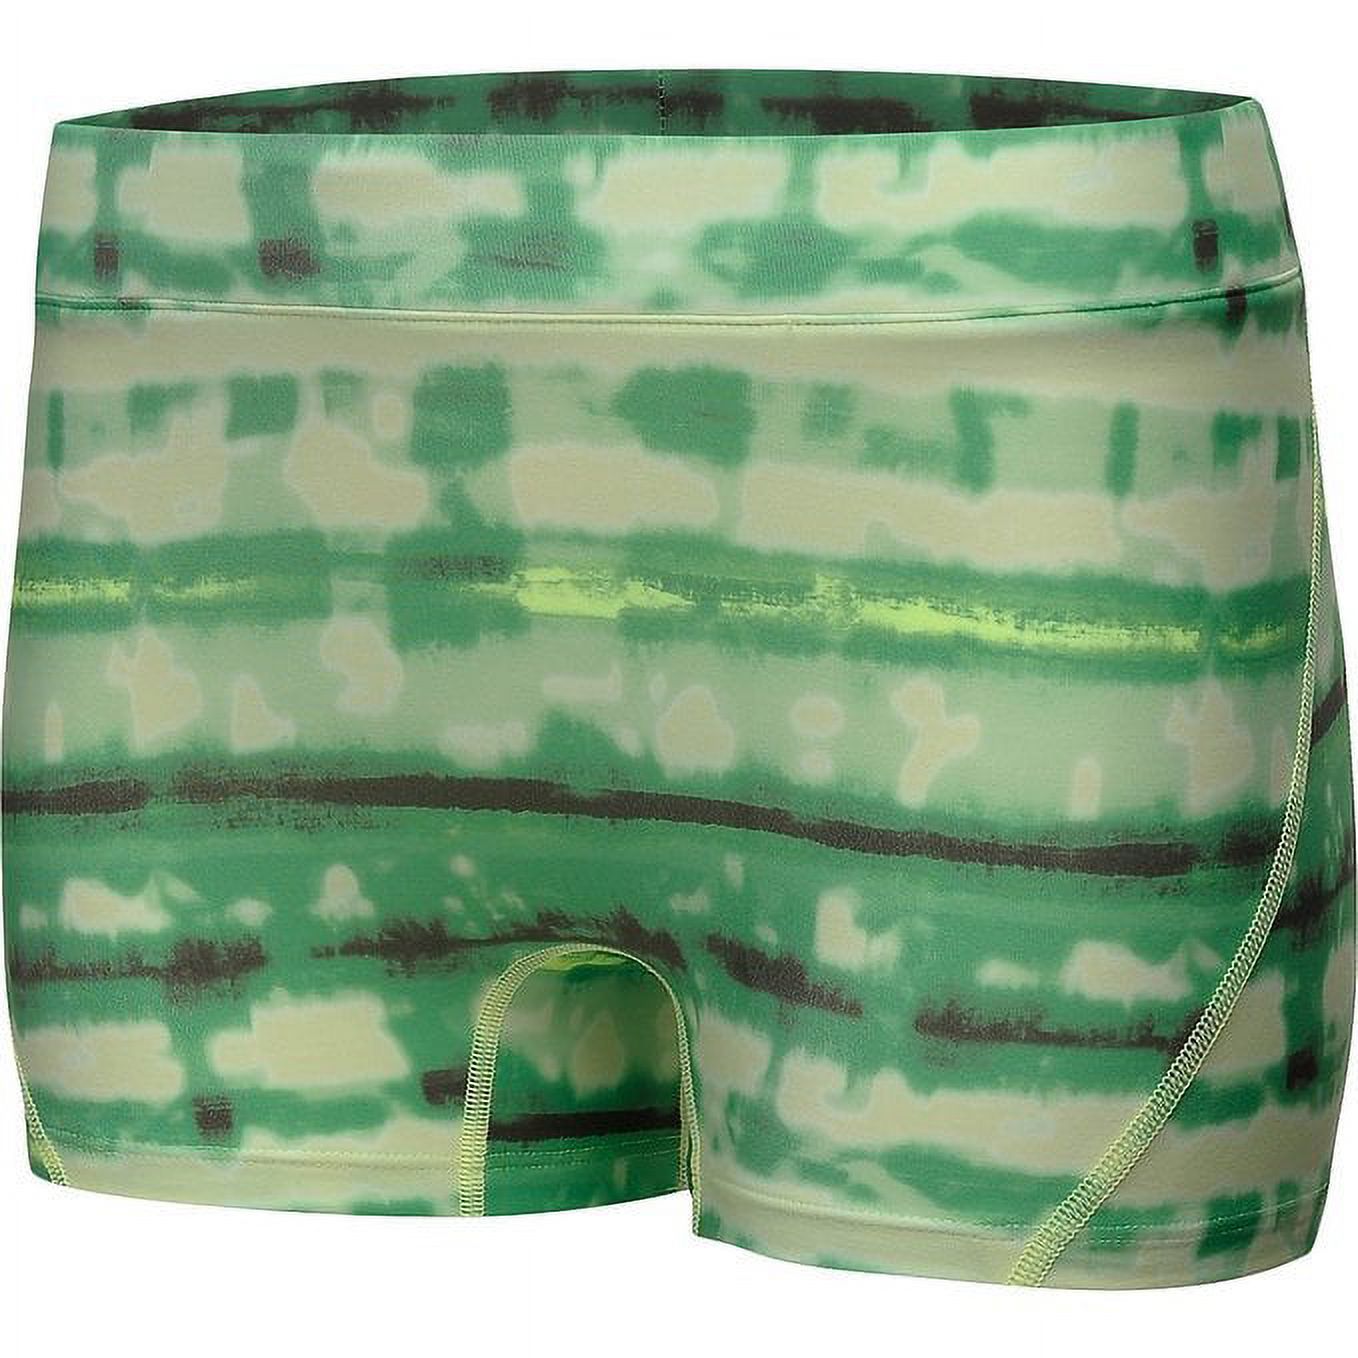 Under Armour Women's TG 3" Compression Shorts-Green-XL - image 1 of 1